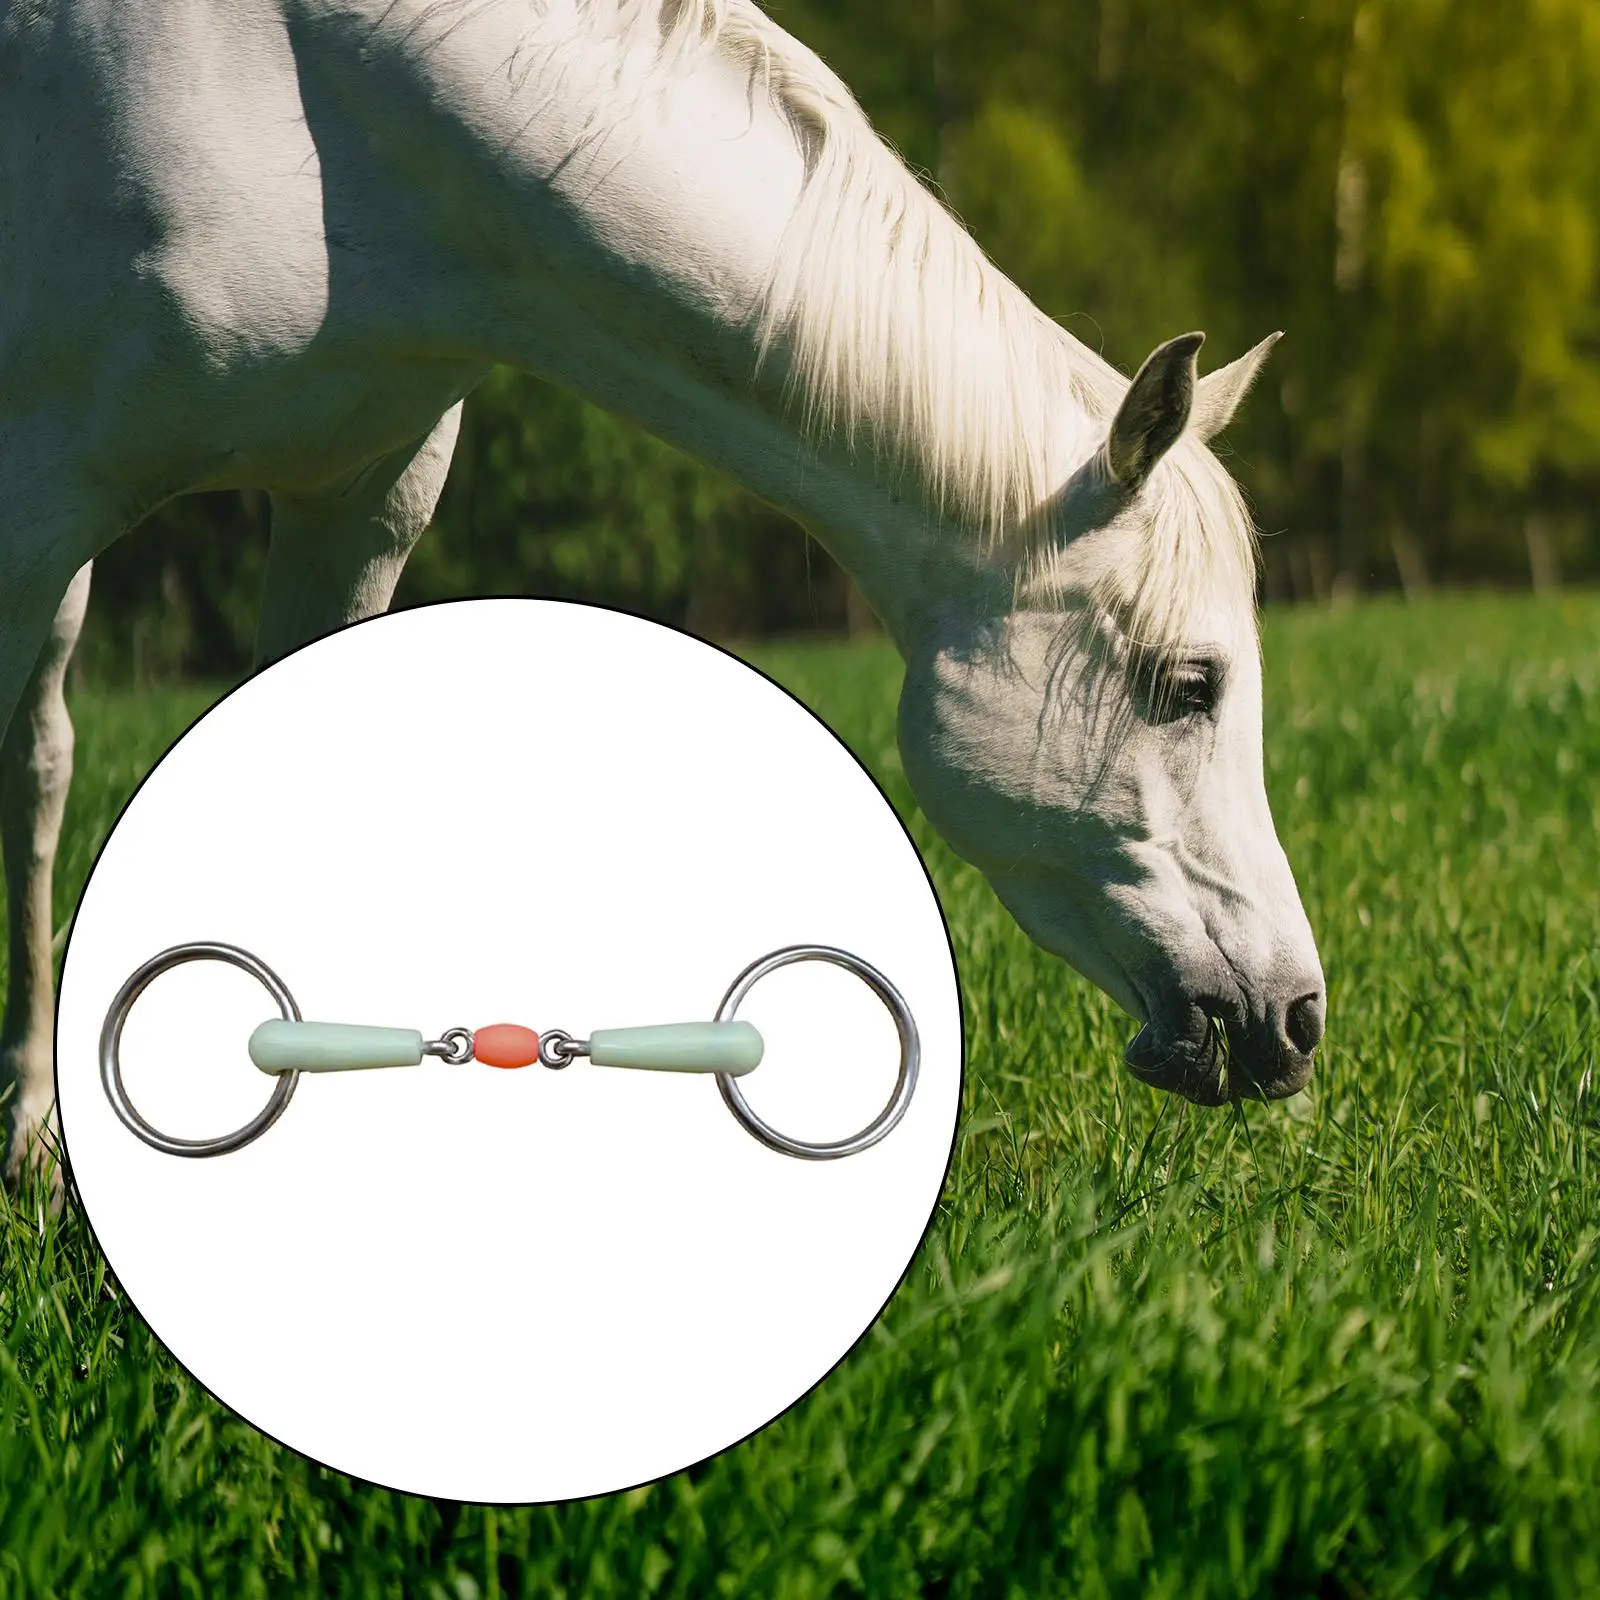 horse Mouth Bit Flavor Horse Bit Supplies Snaffle Bits Round Link for Equipment